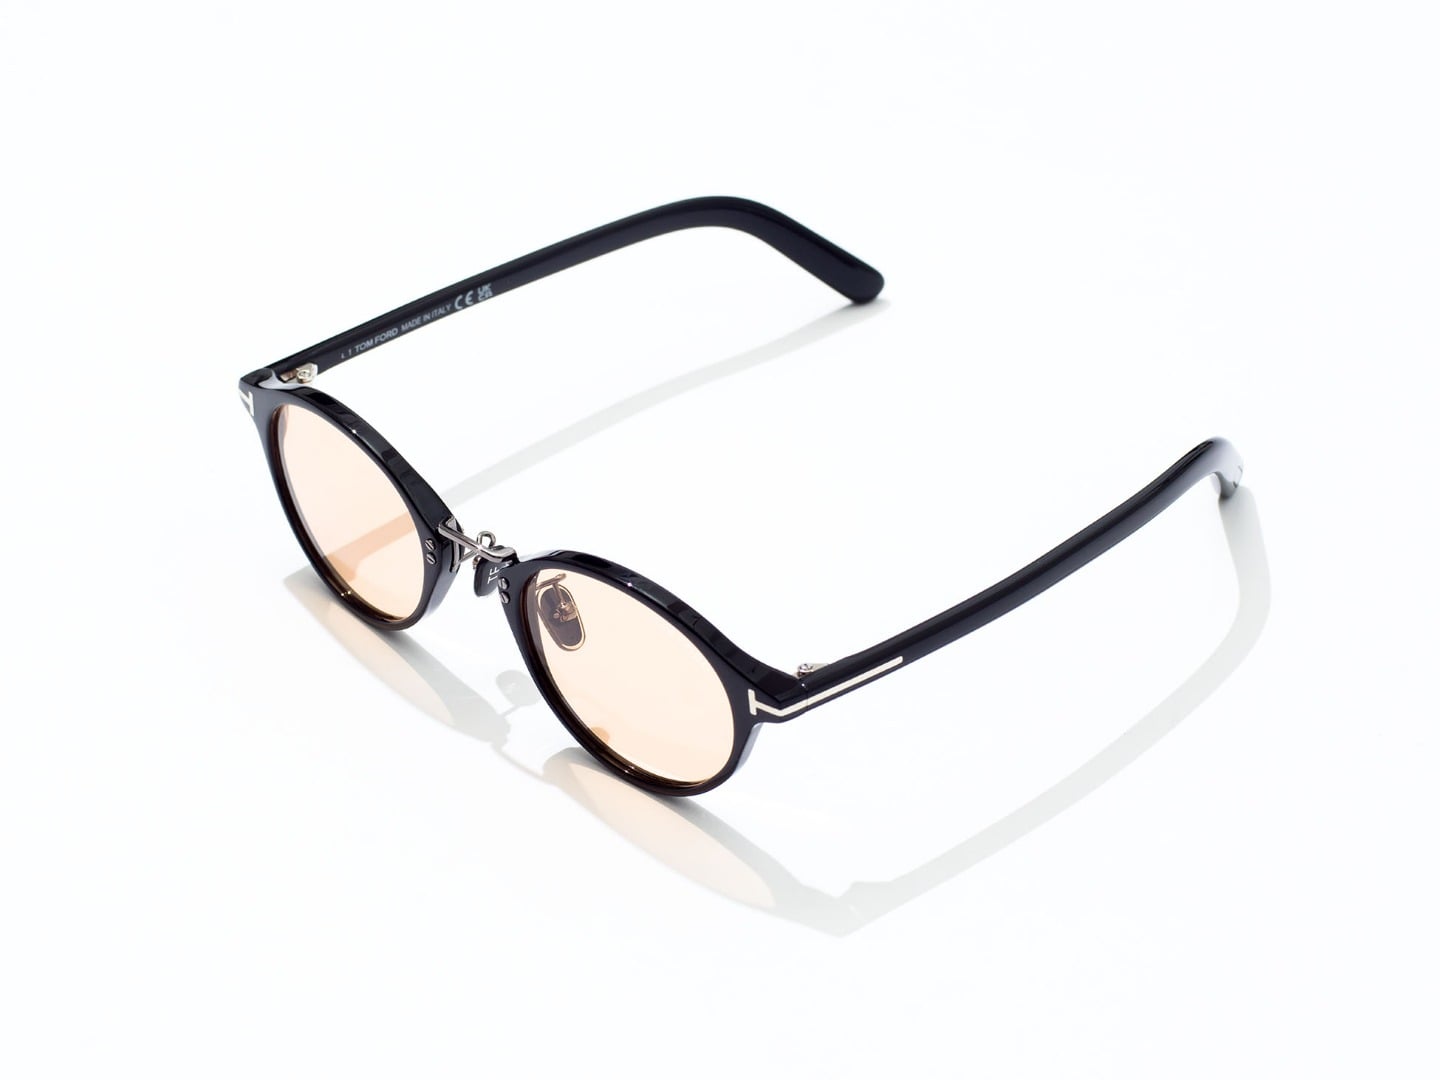 TOM FORD EYEWEAR Exclusive for Ron Herman 8.5(Sat) New Arrival